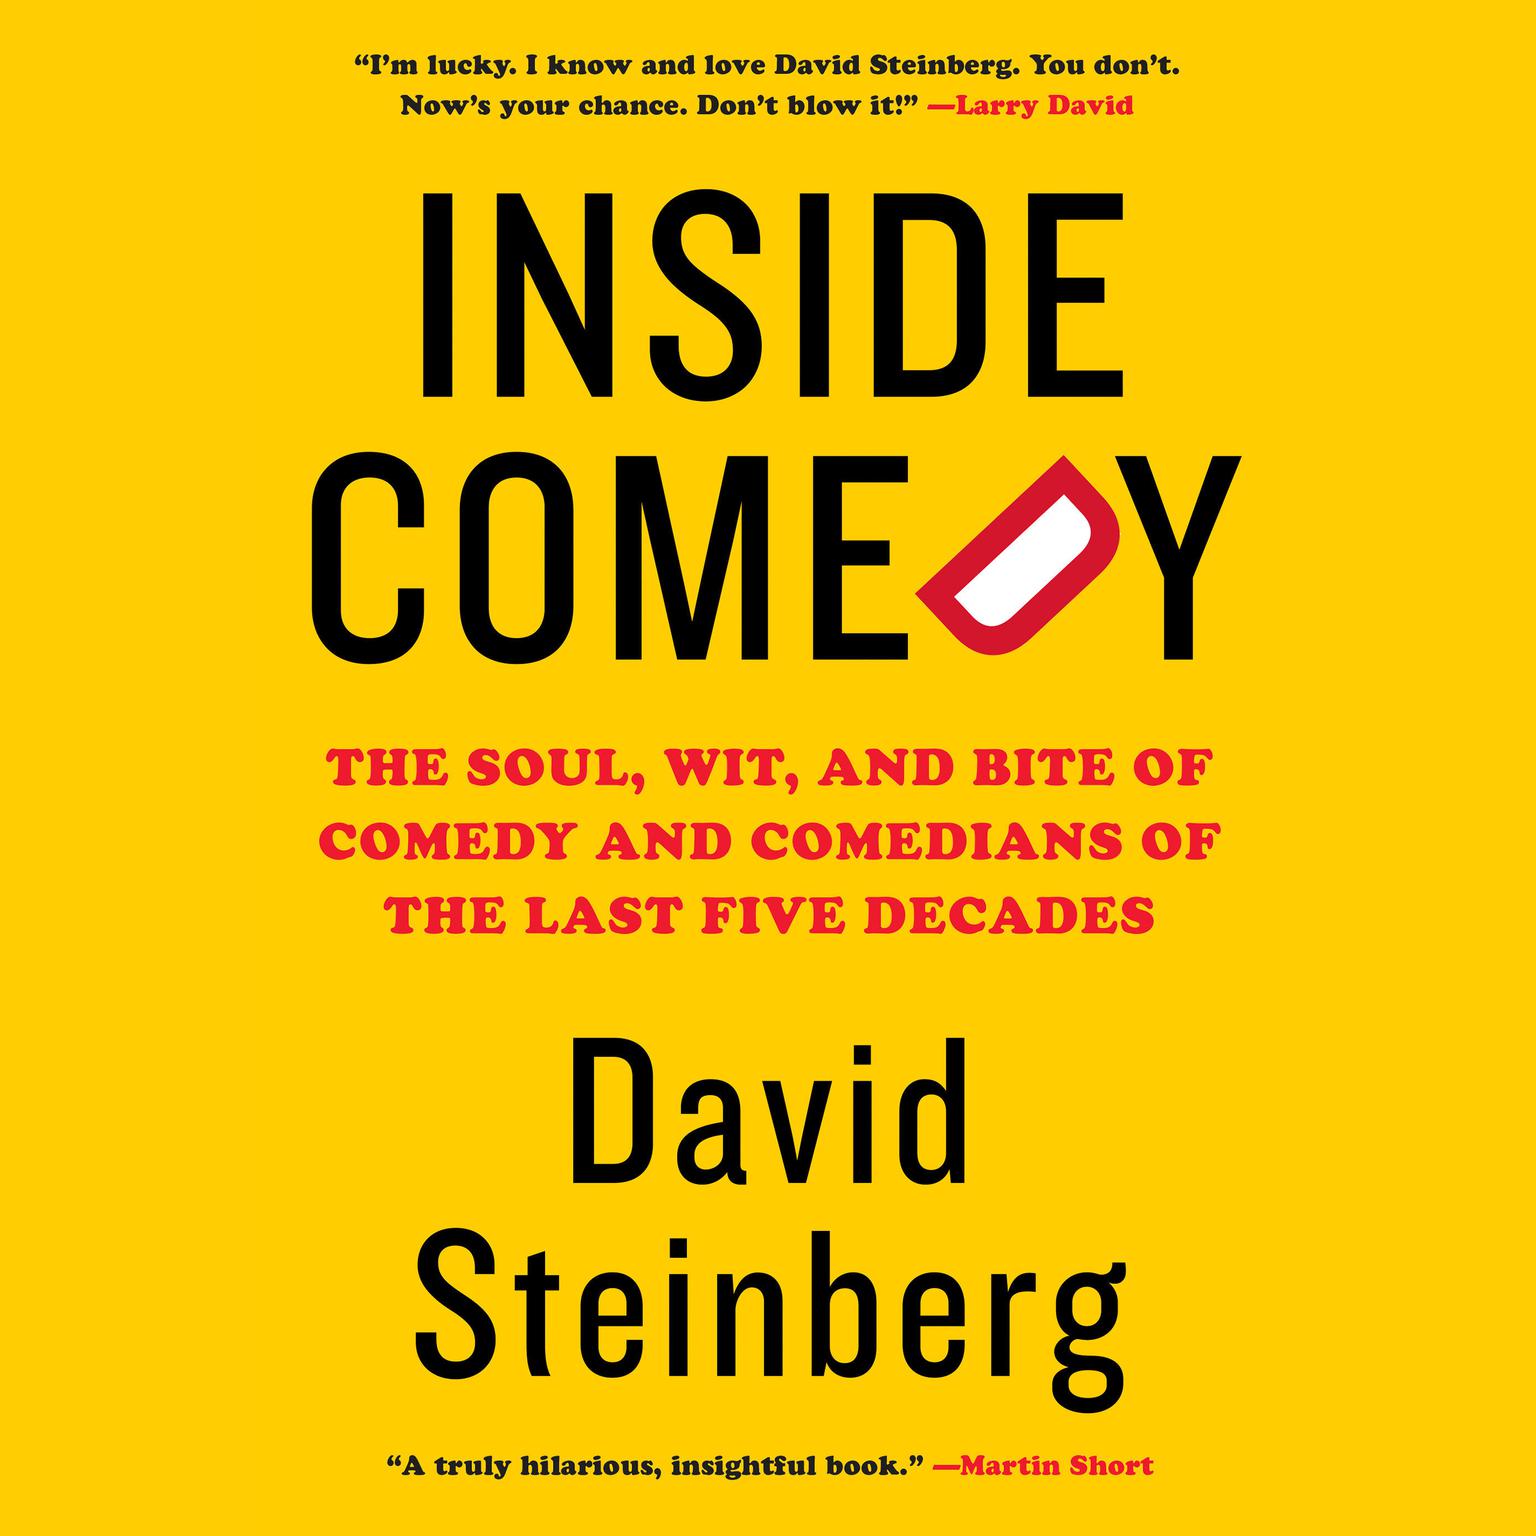 Inside Comedy: The Soul, Wit, and Bite of Comedy and Comedians of the Last Five Decades Audiobook, by David Steinberg